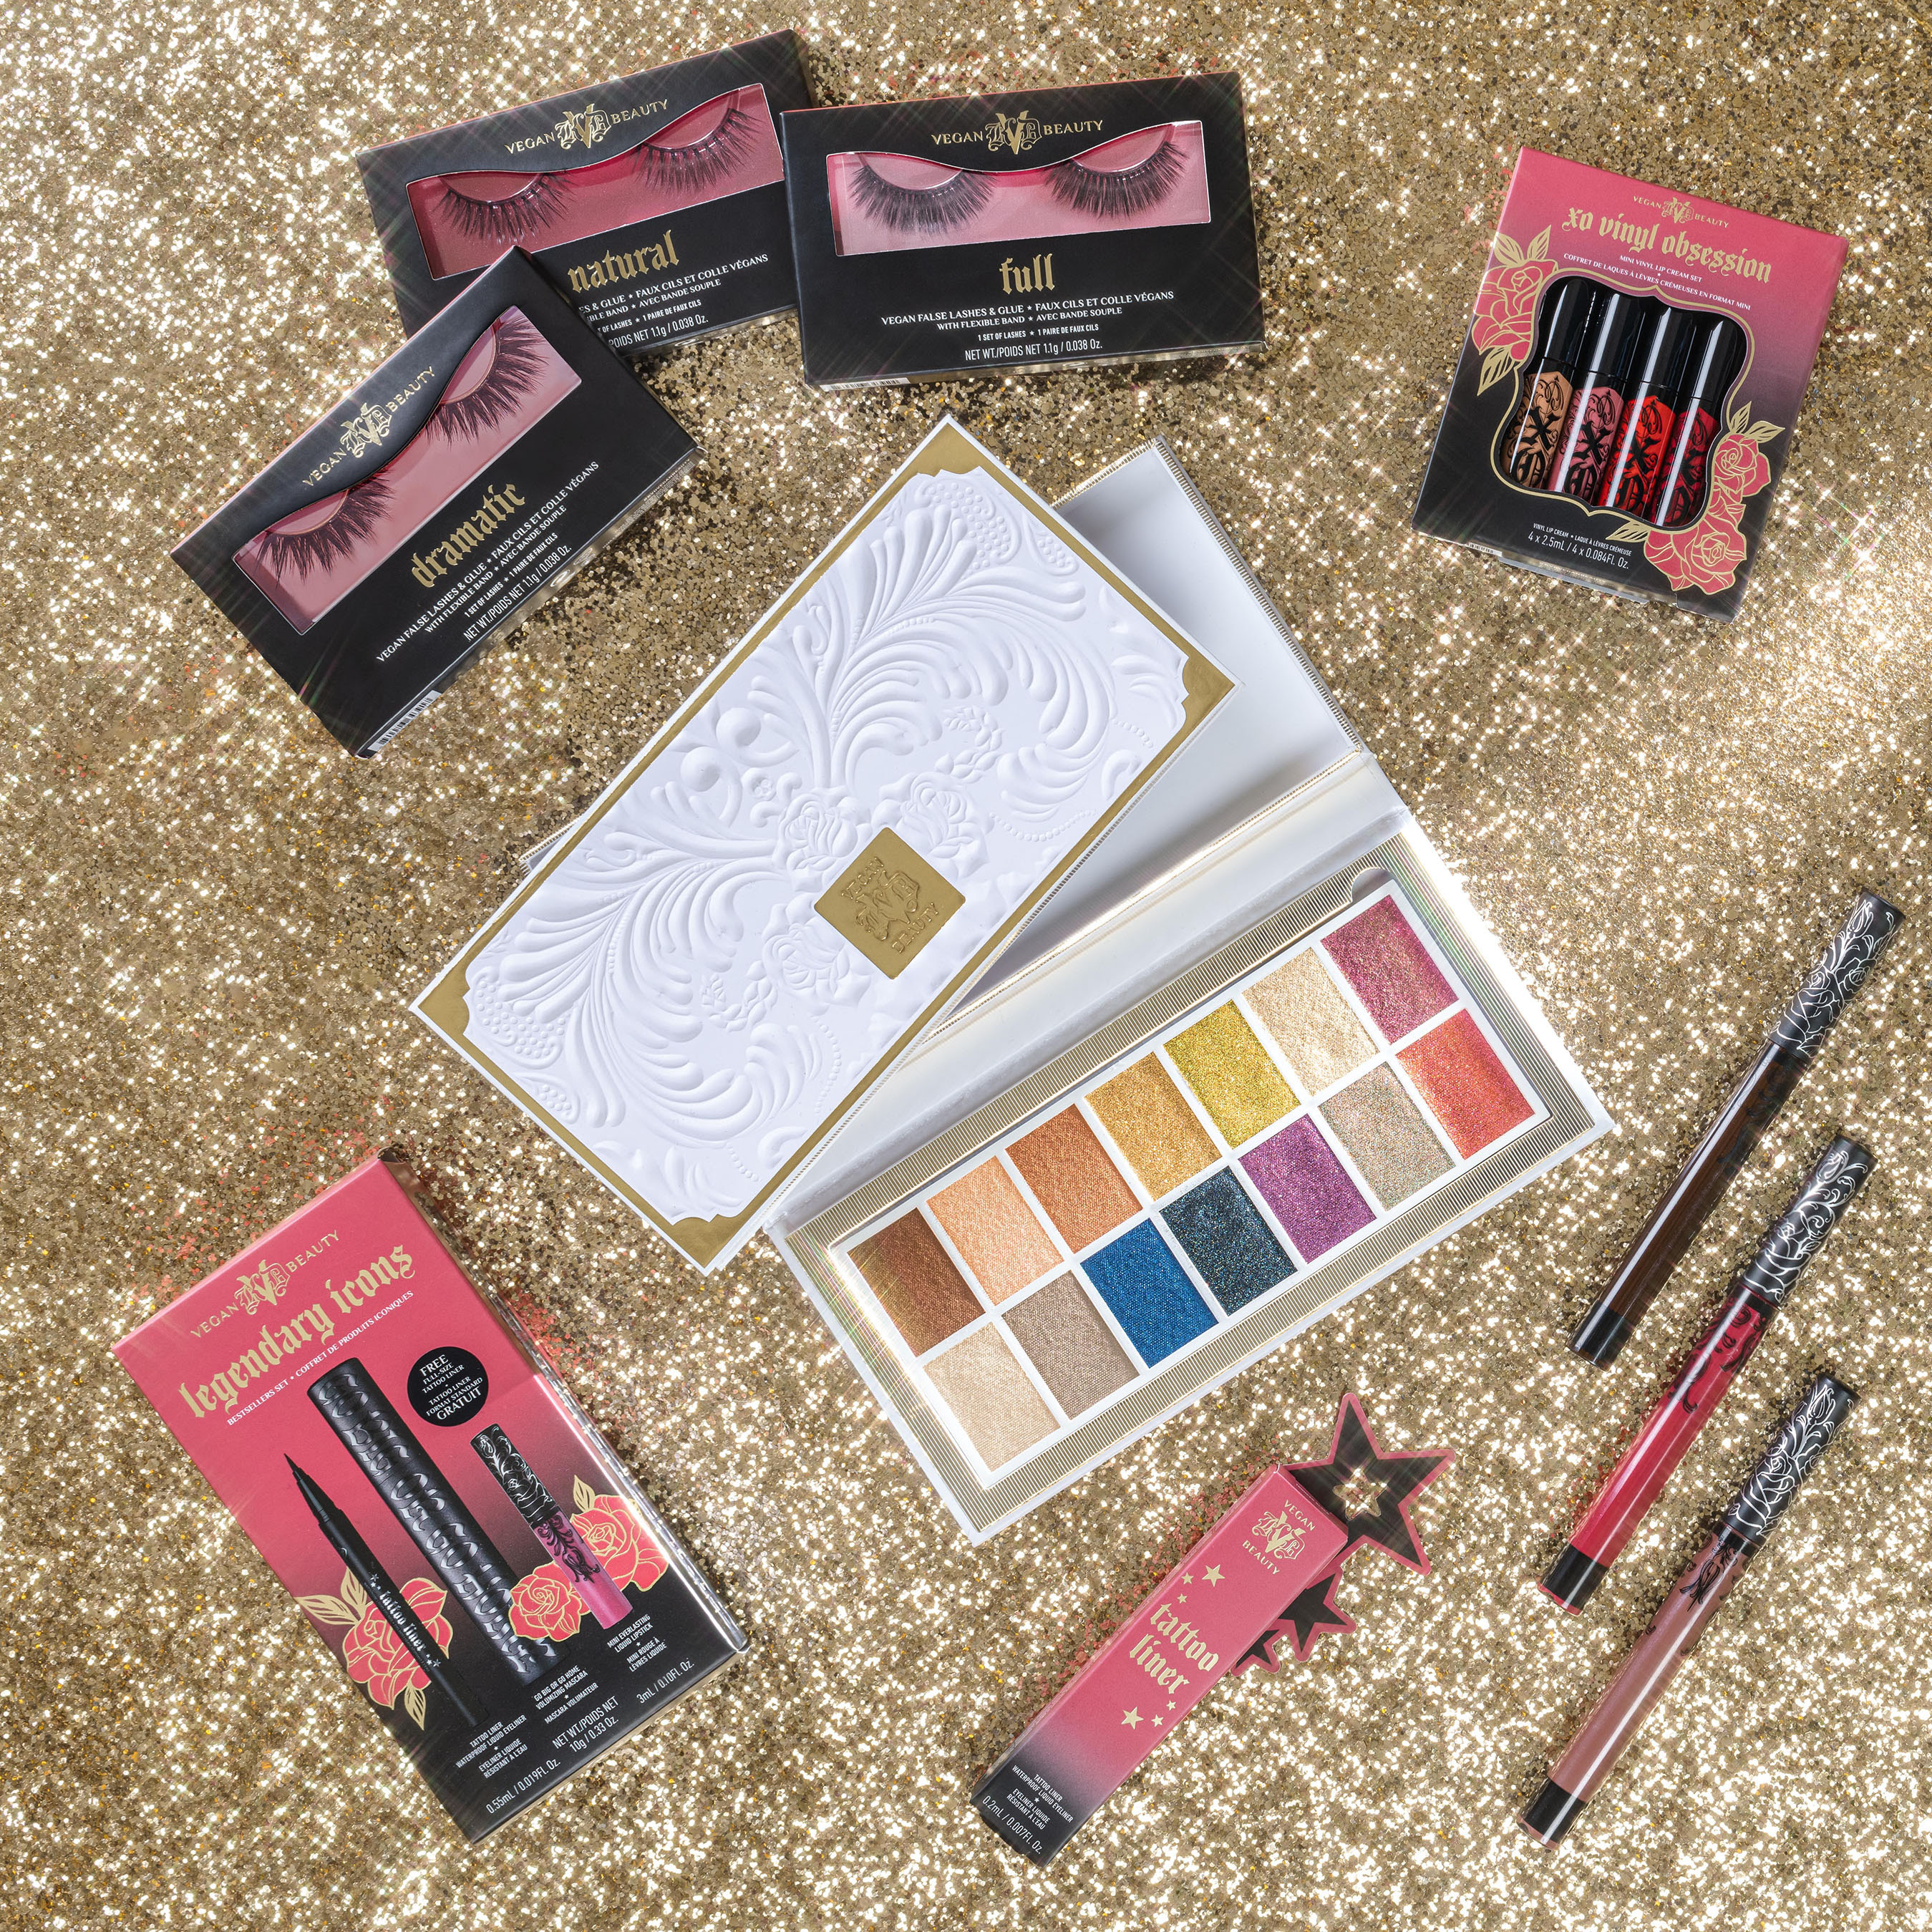 KVD Vegan Beauty Debuts Holiday 2020 with First-Ever Fully-Recycled Eyeshadow Palette, Dazzling Shadows Sticks, Vegan Lashes and a Plethora of Giftable Products